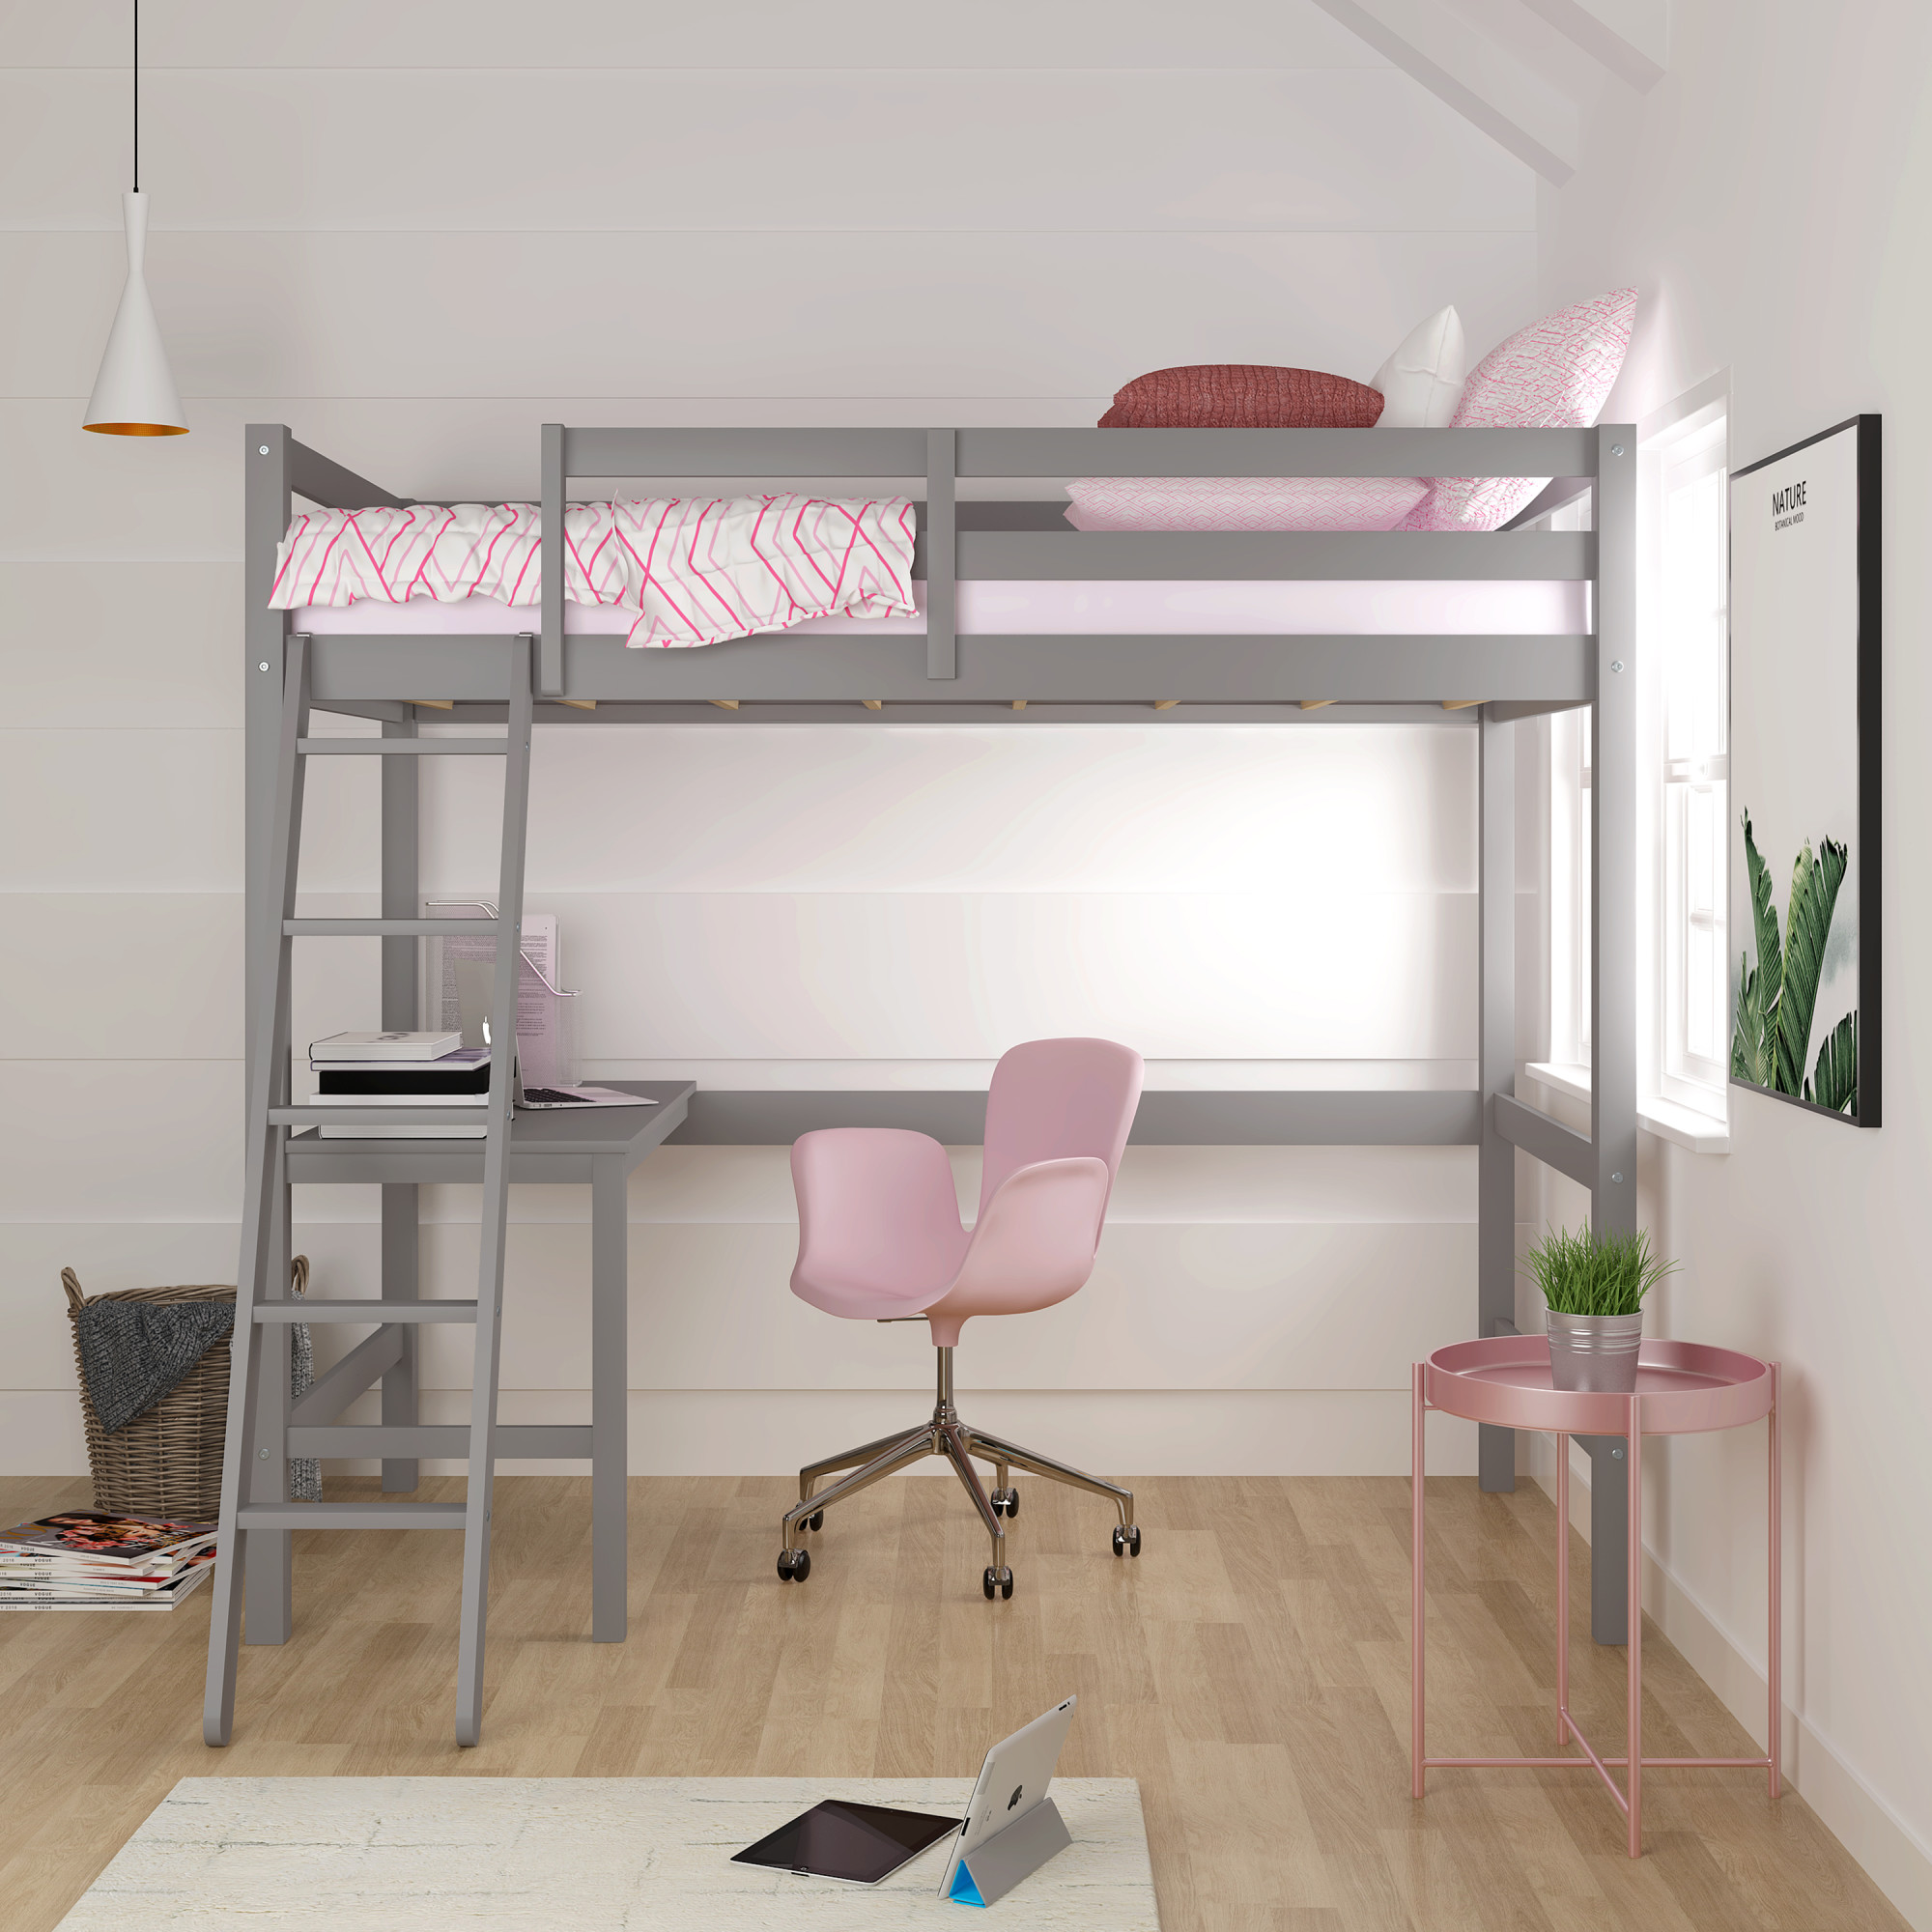 Hillsdale Campbell Wood Twin Loft Bunk Bed with Desk, Gray - image 4 of 14